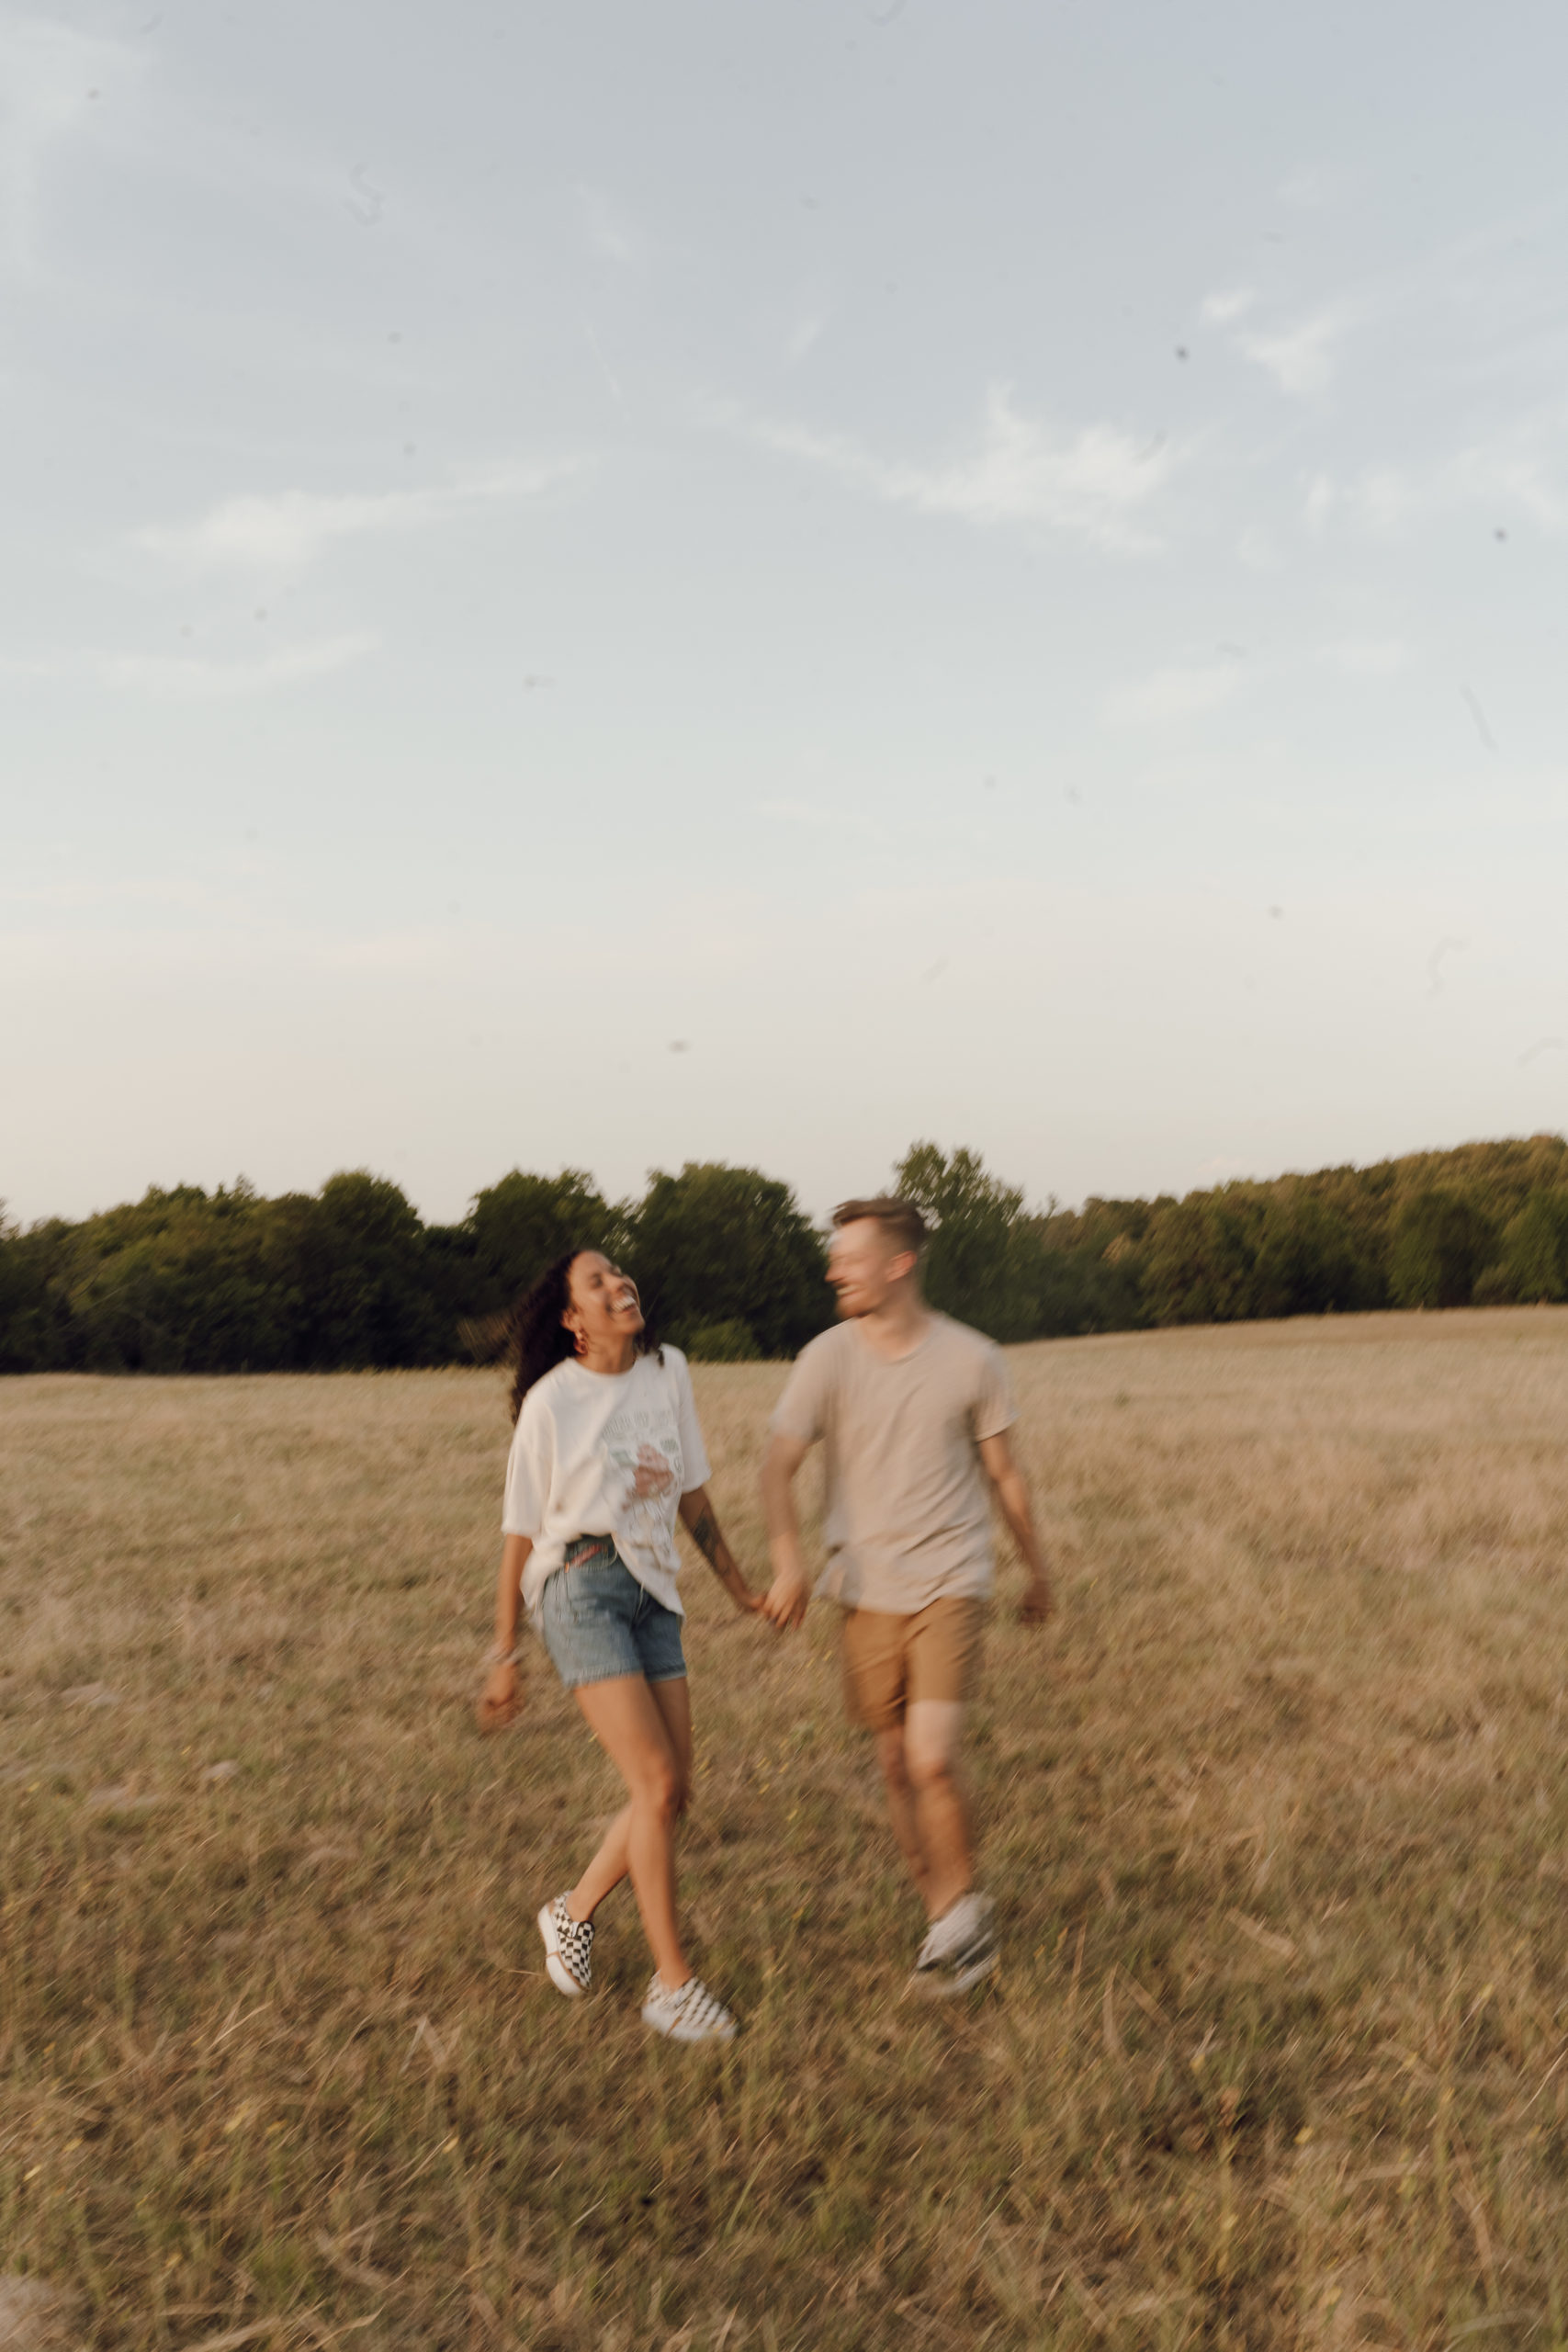 Motion blur of couple in love in the hay field.